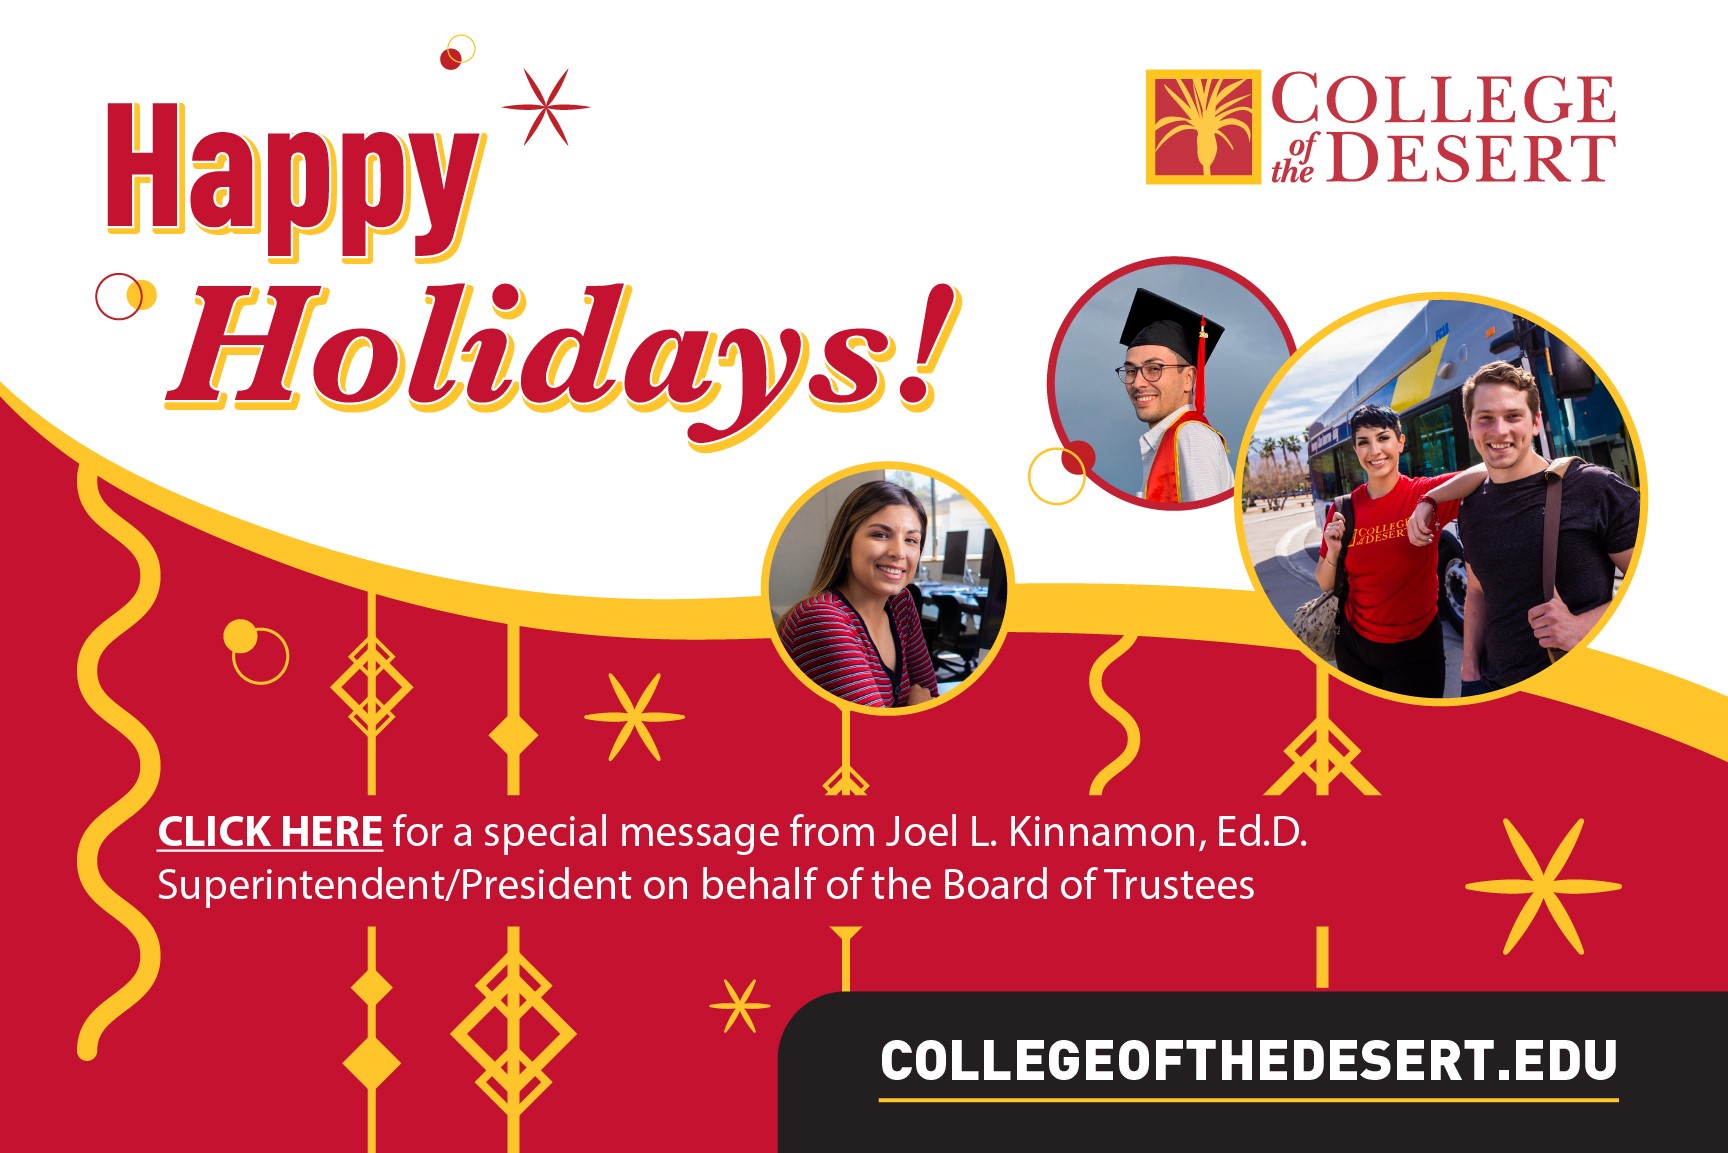 Happy Holidays from the Collegeof the Desert